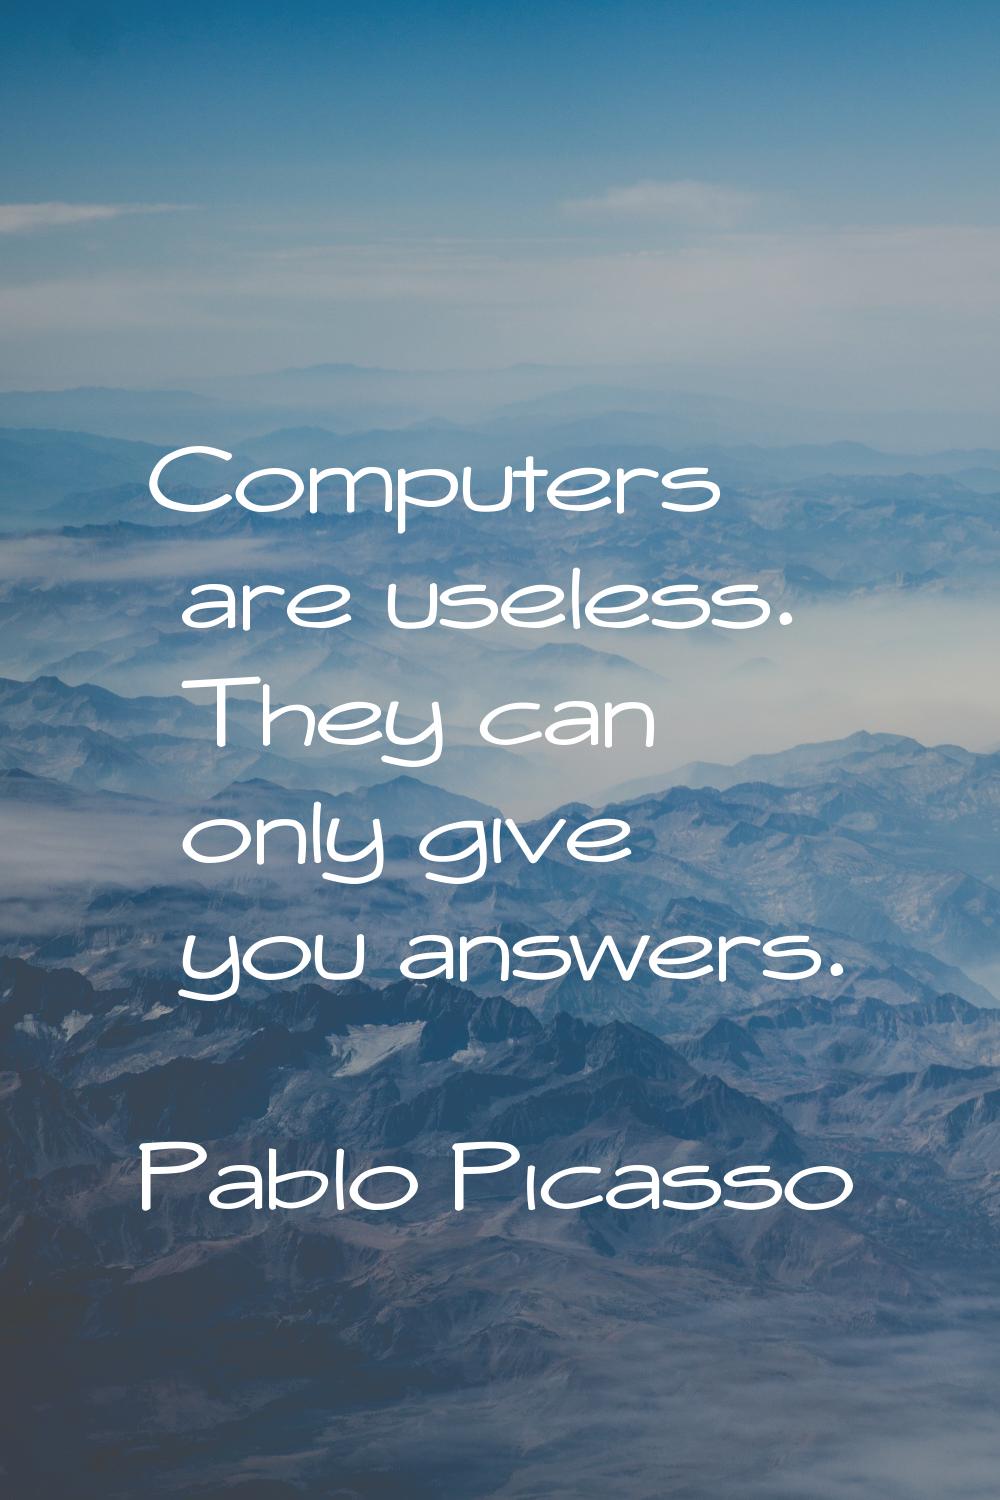 Computers are useless. They can only give you answers.